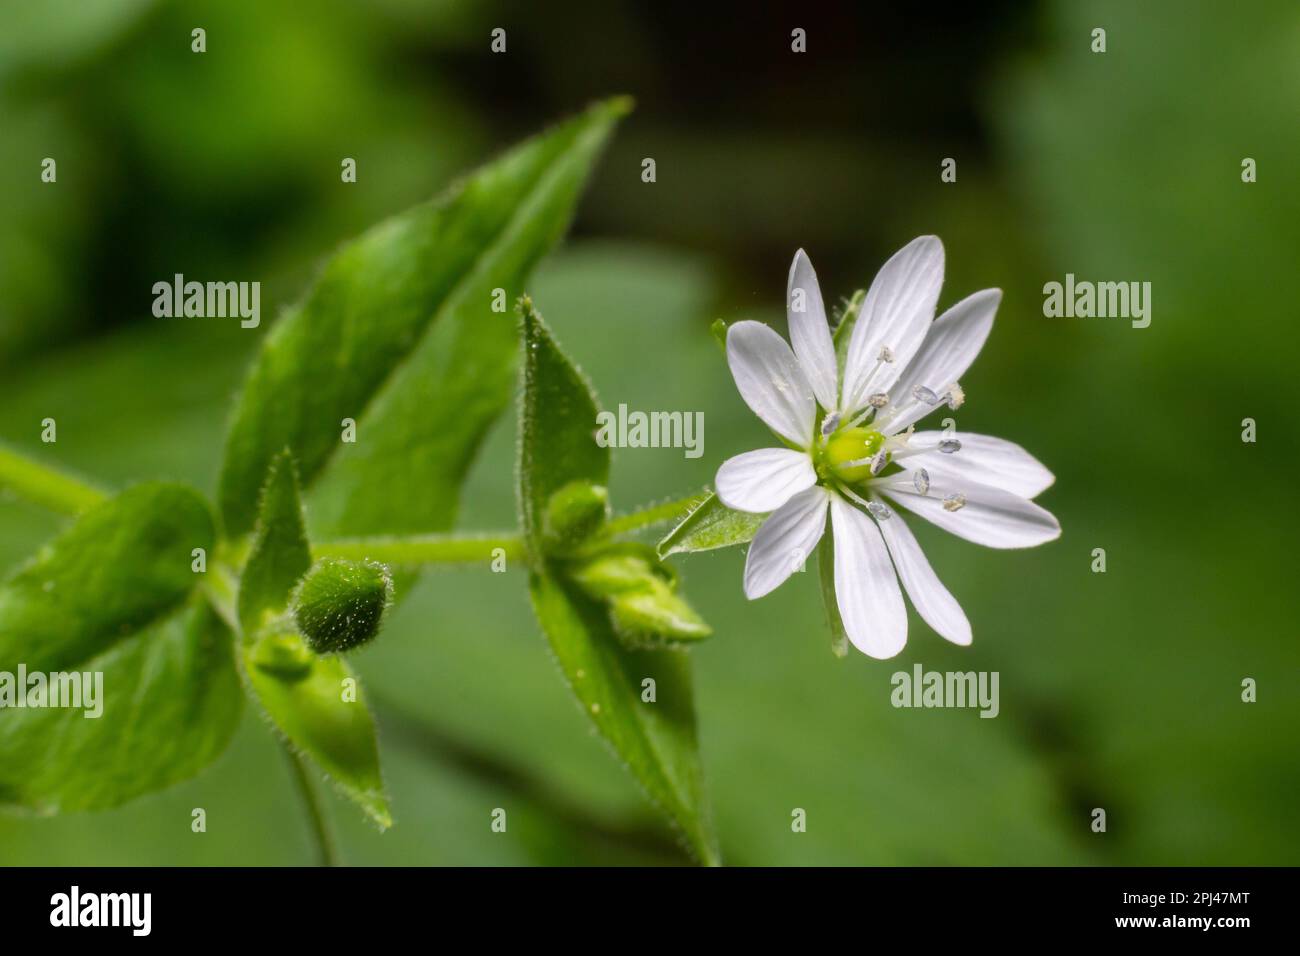 Myosoton aquaticum, plant with small white flower known as water chickweed or giant chickweed on green blurred background. Stock Photo